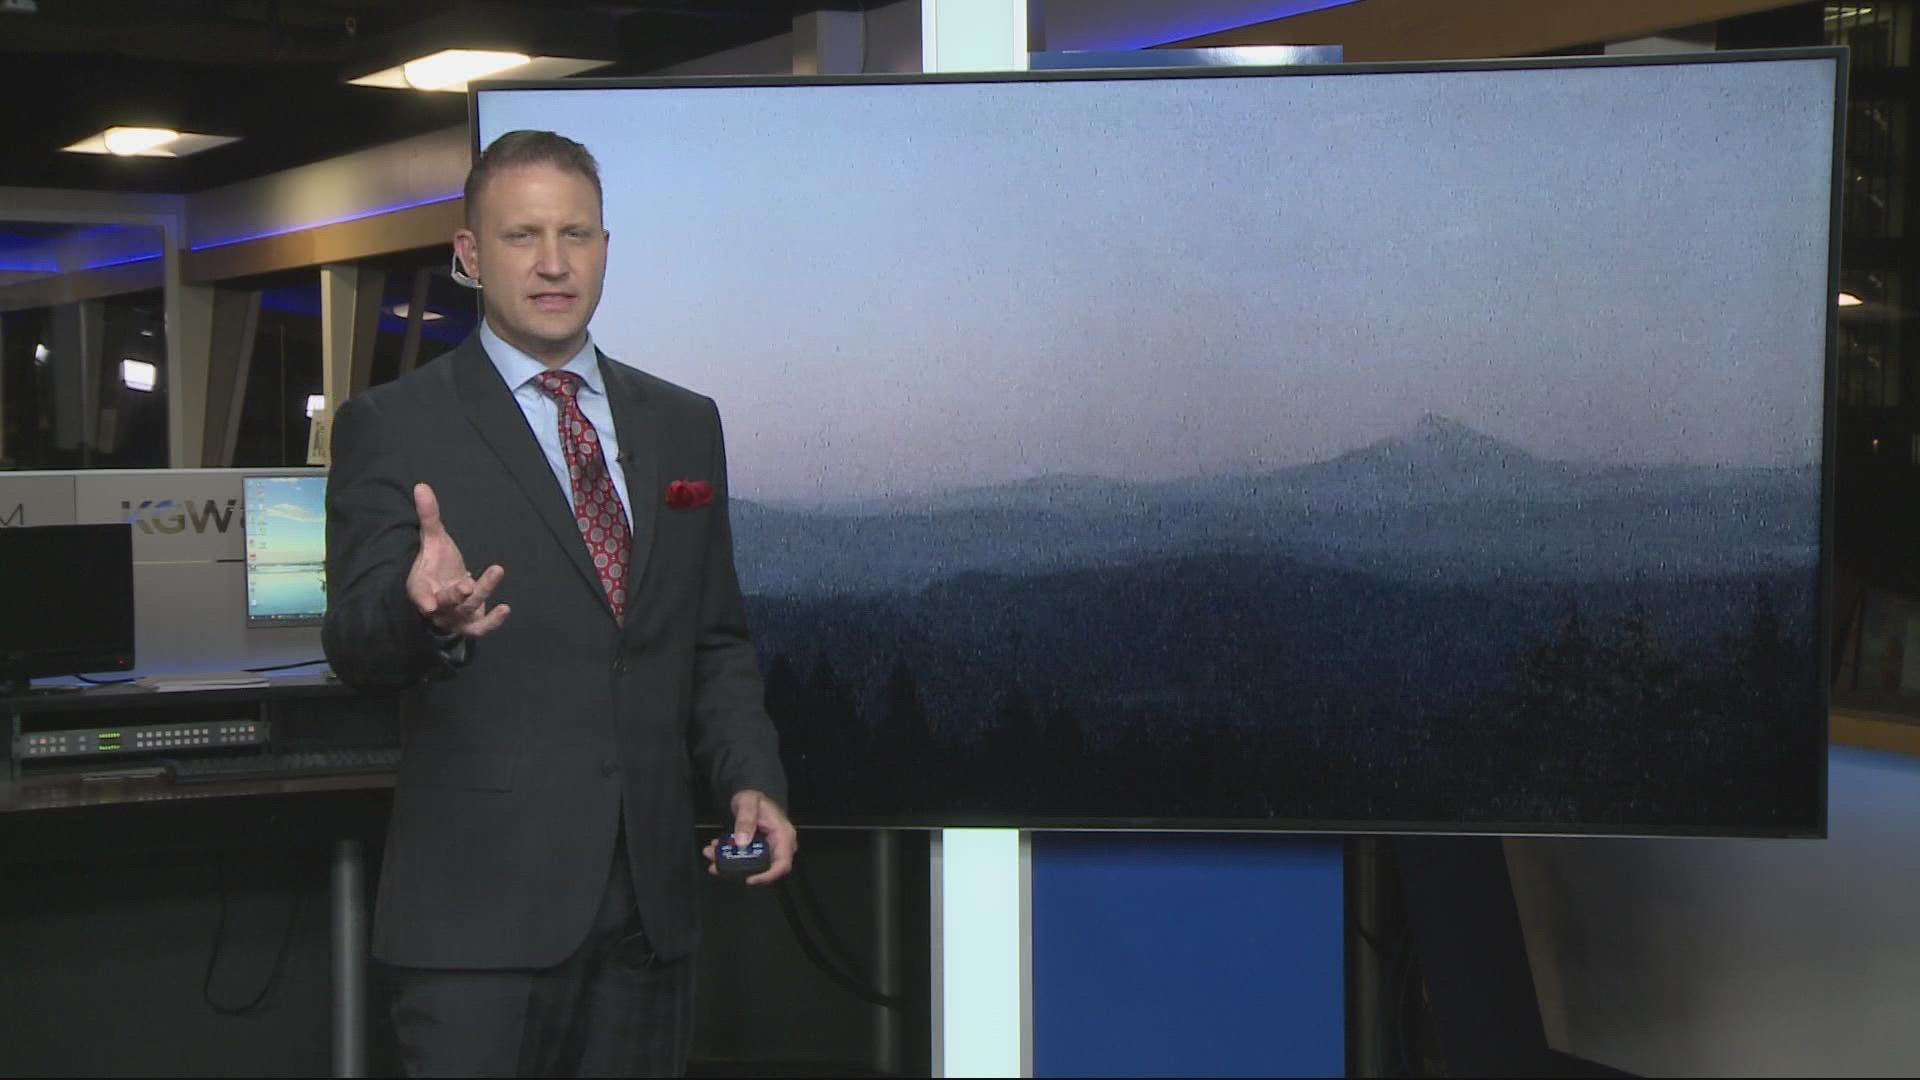 KGW meteorologist Joe Raineri said the smoke and haze will stick around all day Tuesday and into Wednesday.